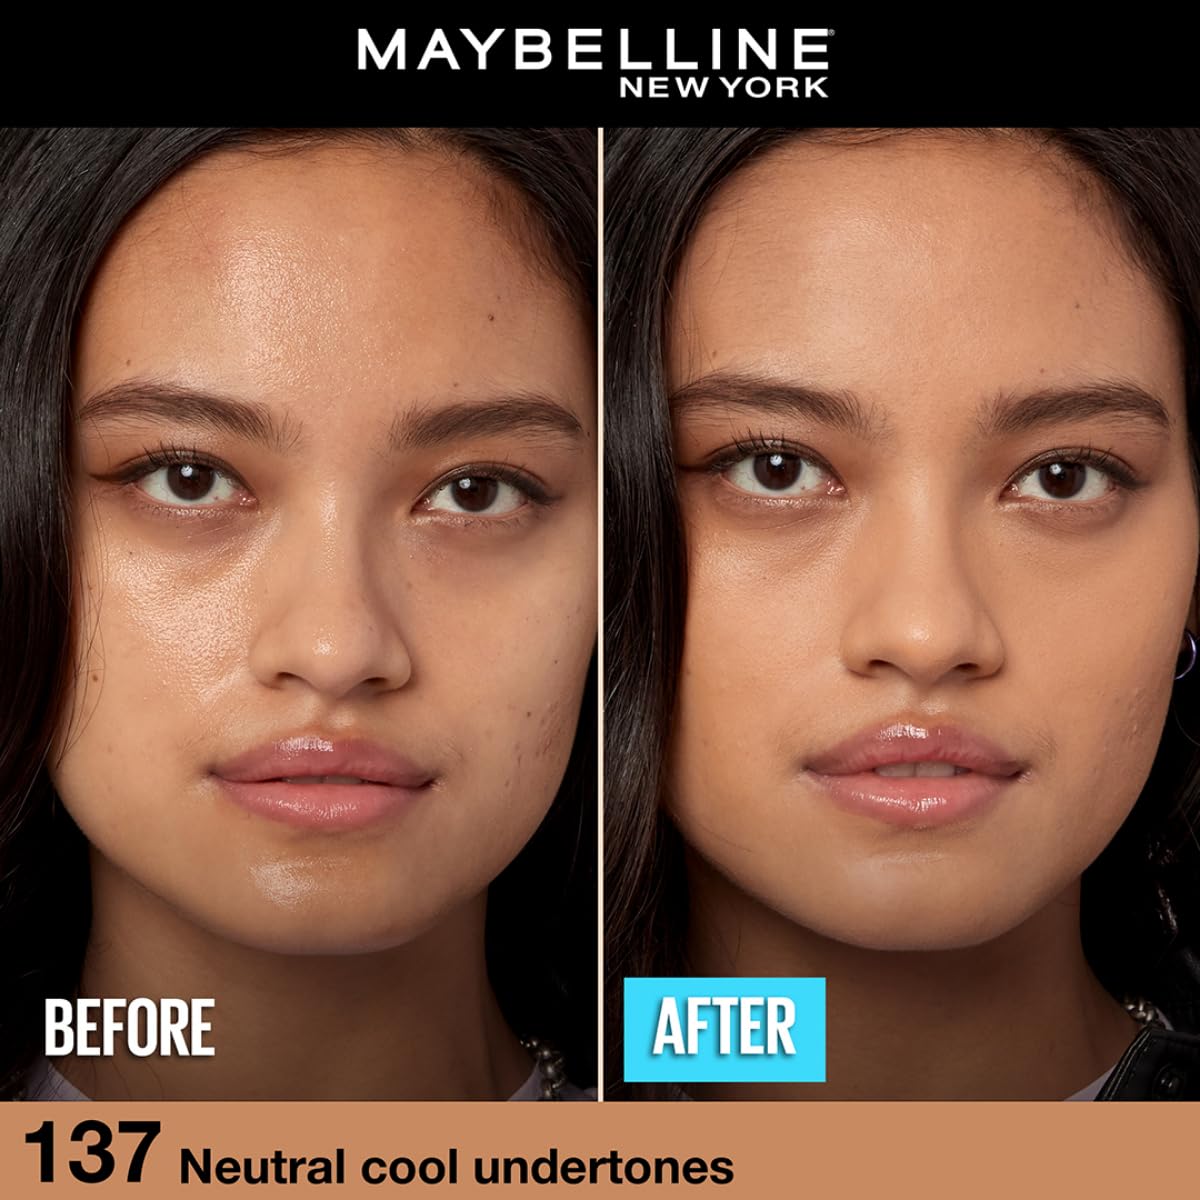 Maybelline Fit Me Matte+ Poreless Normal to Oily Foundation- 137 Golden Tan